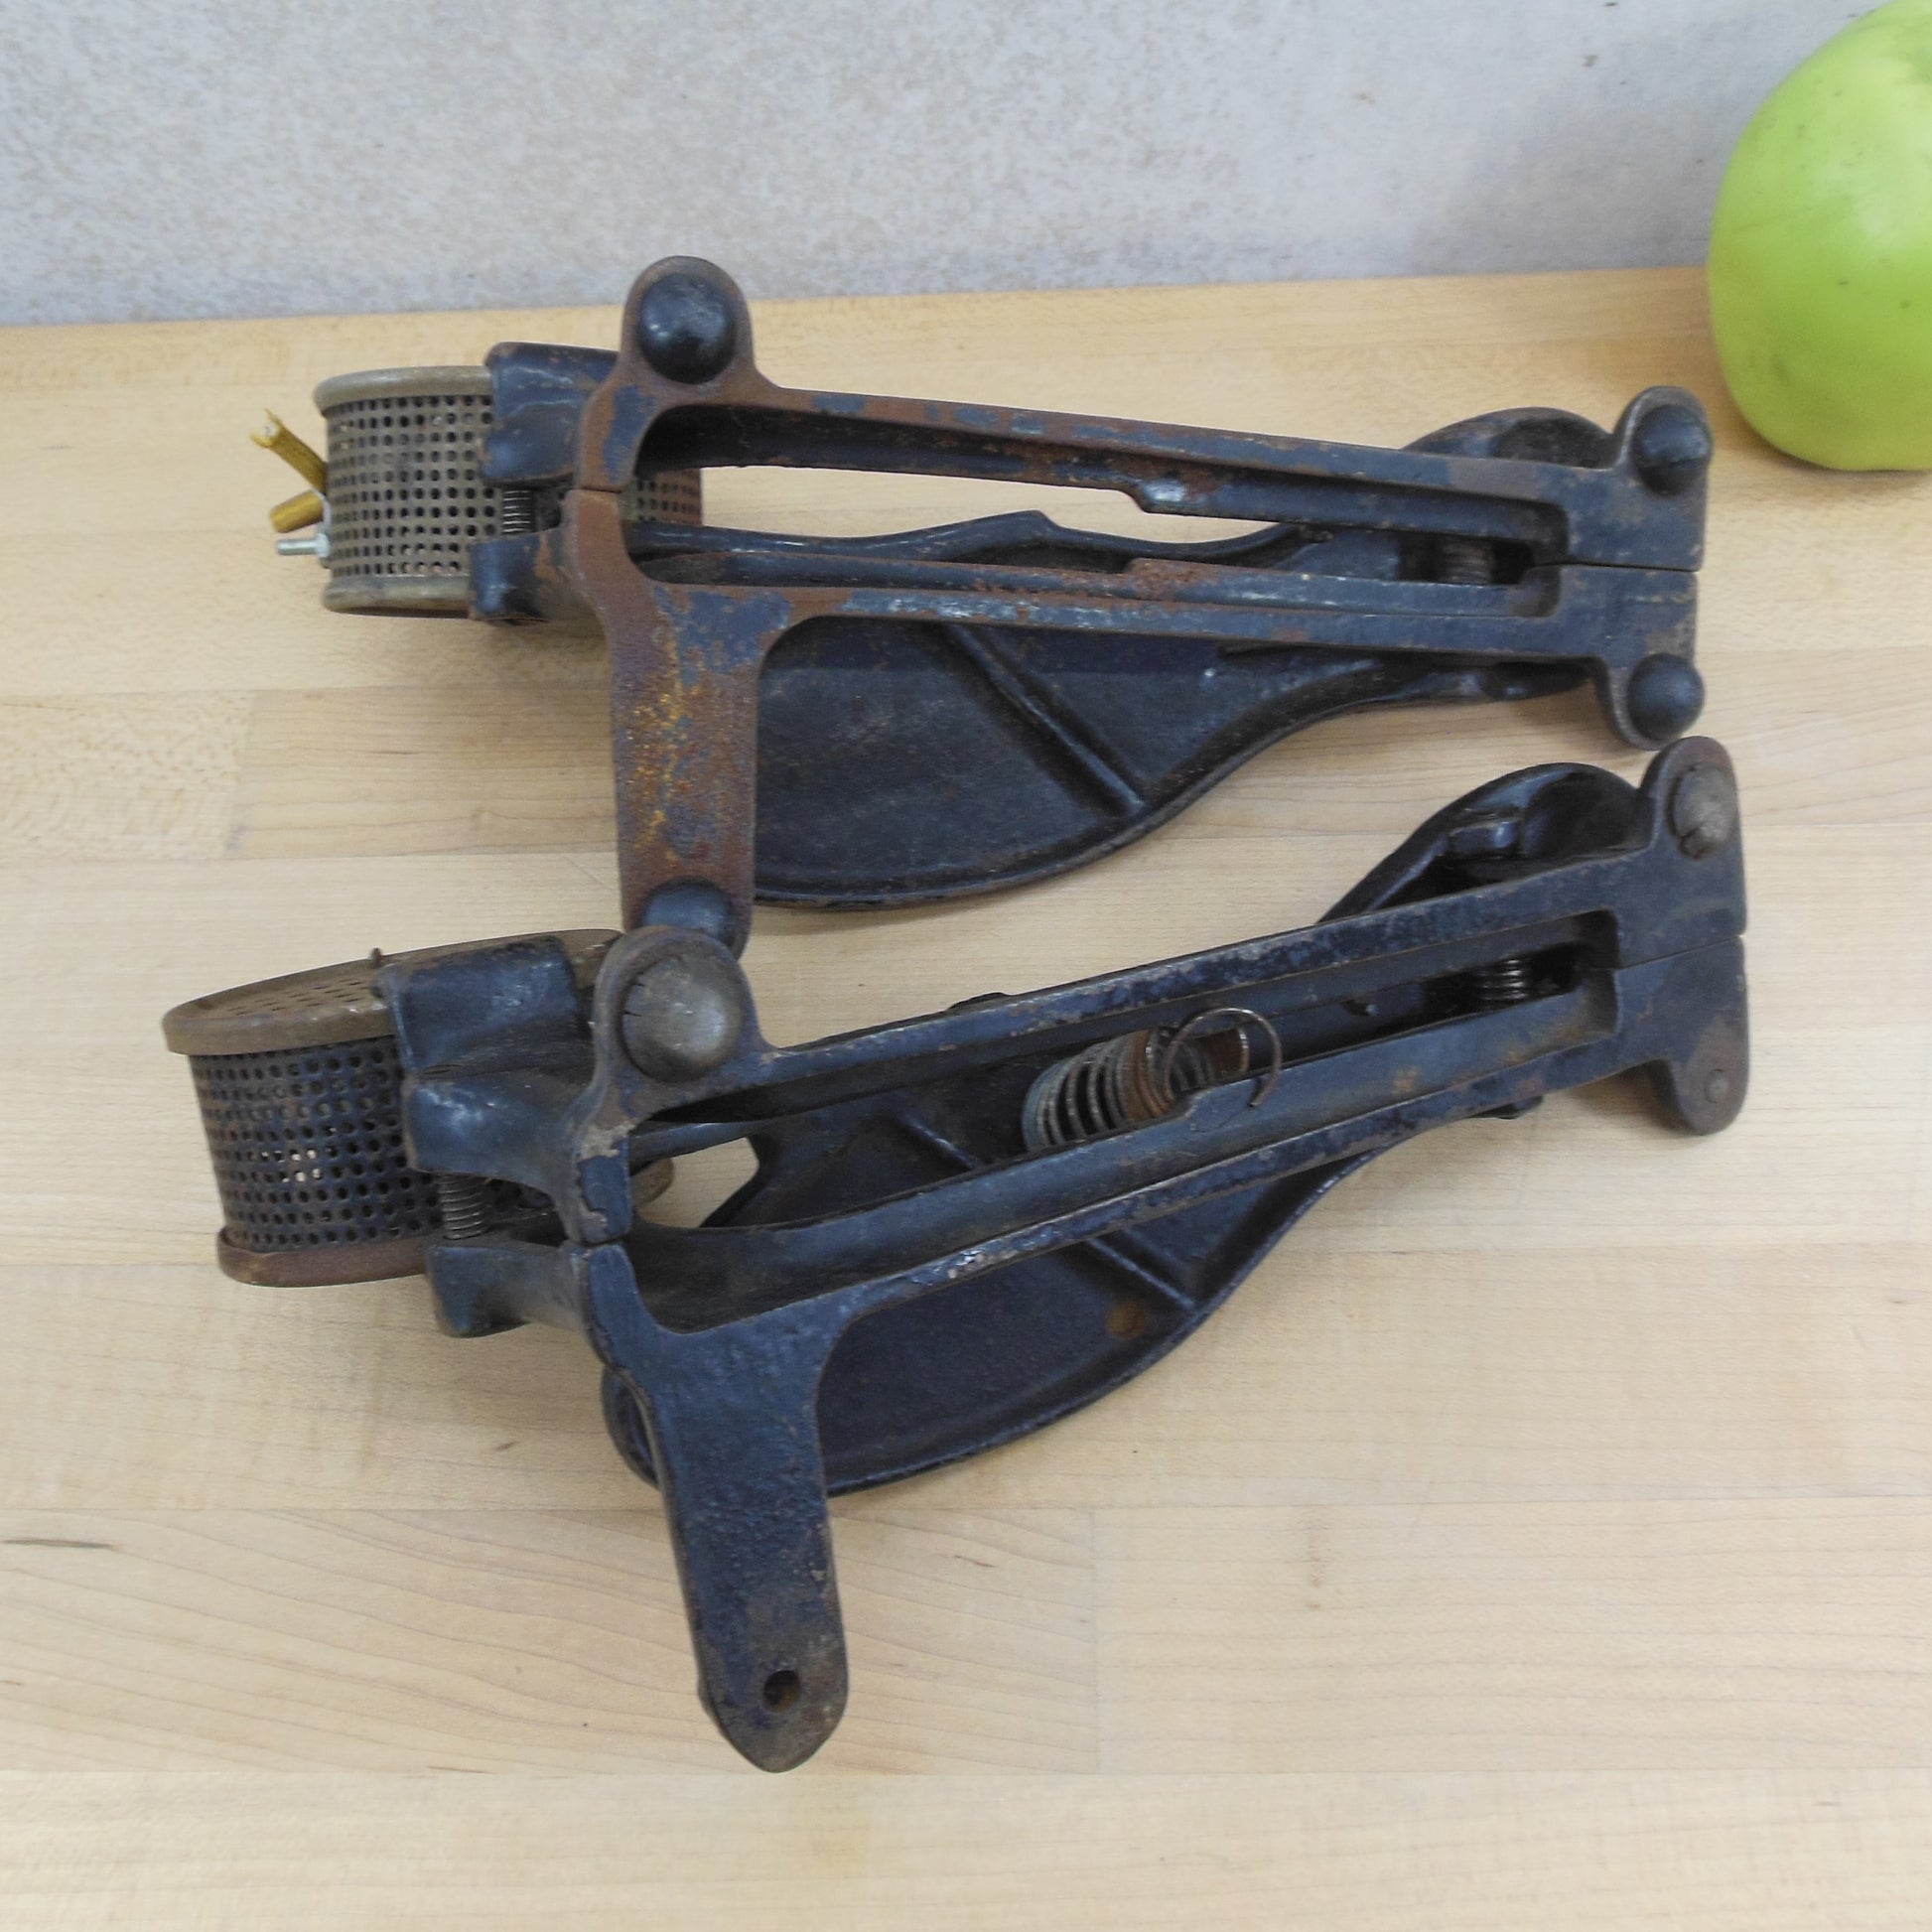 Vintage Pair Sewing Machine Cast Iron Speed Control Pedal Rheostat Used Parts Repair